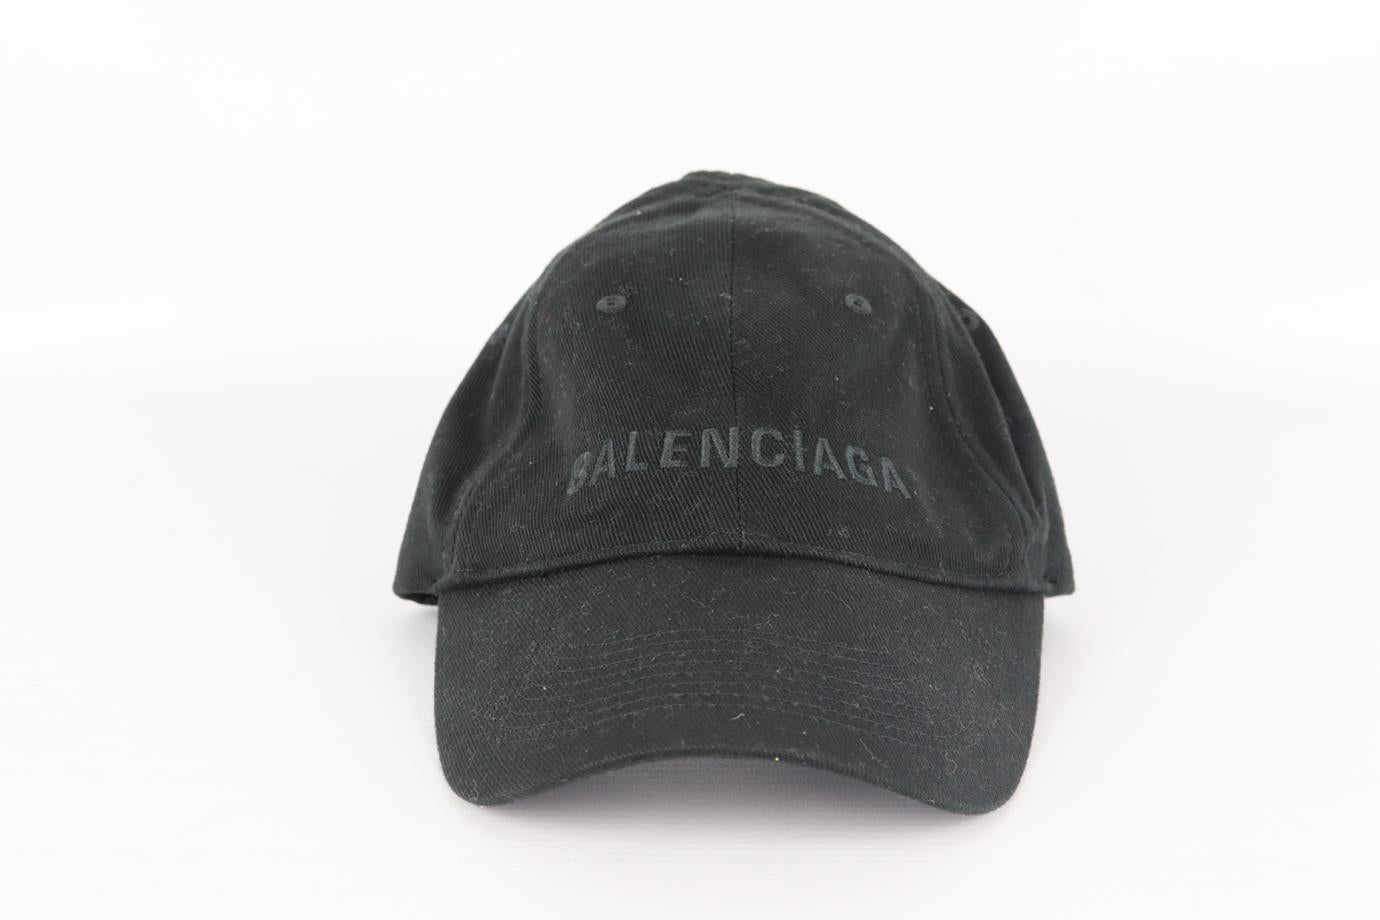 Balenciaga logo embroidered cotton twill baseball cap. Black. Fastening at back. 100% Cotton; fabric2: 100% polyester. Size: Large. Circumference: 22. 8 in. Brim Width: 2.9 in. Very good condition - No signs of wear; see pictures.
